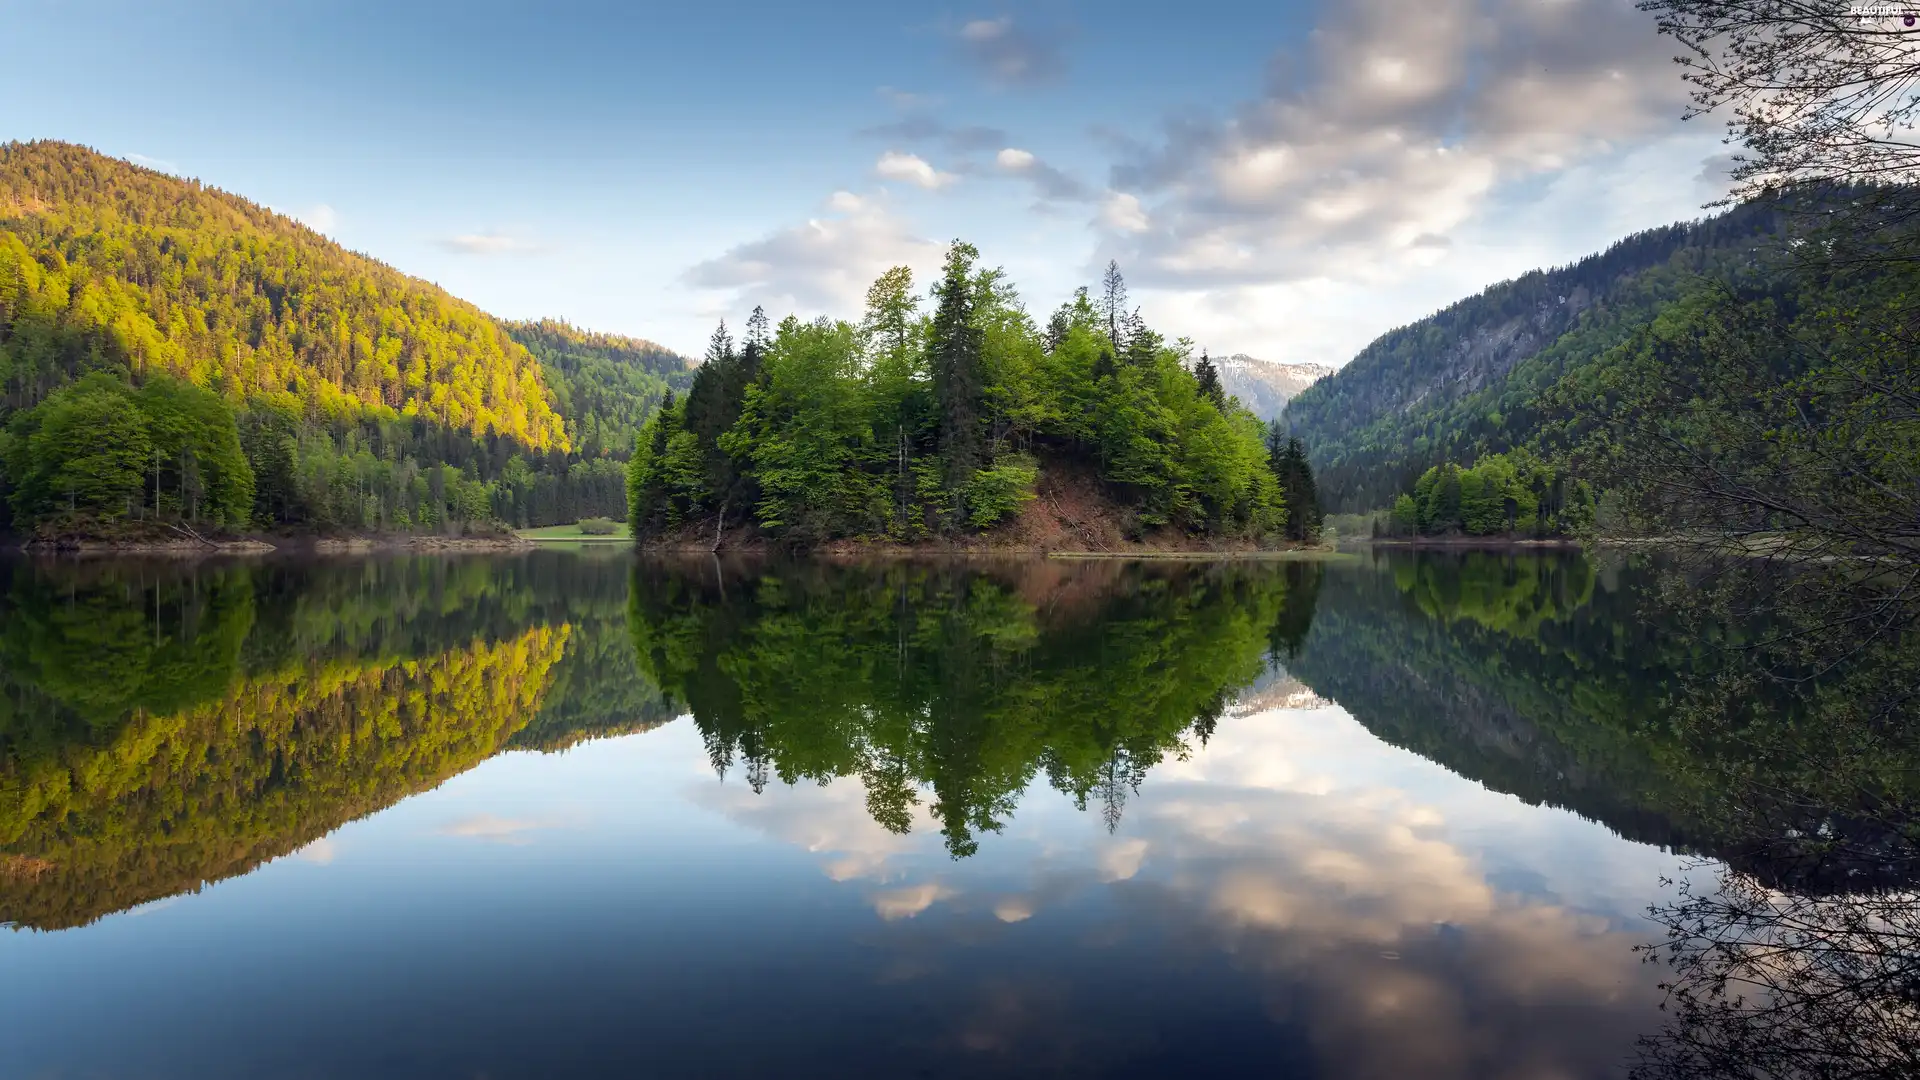 trees, Island, woods, Mountains, lake, viewes, reflection